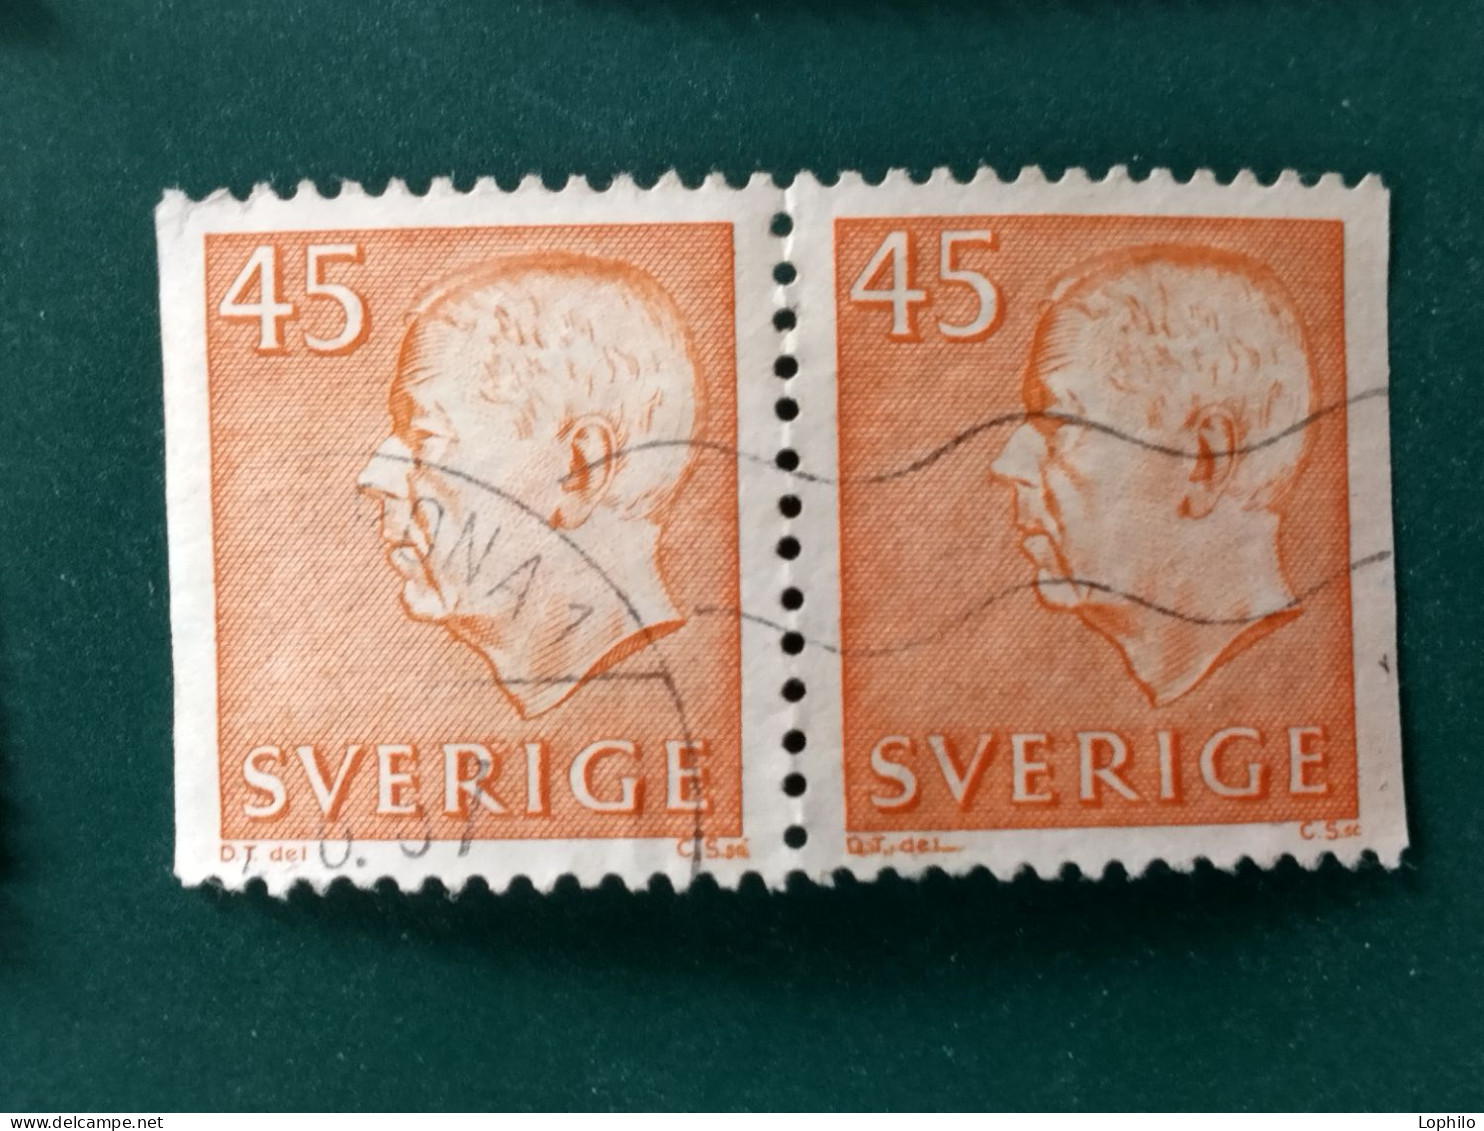 Sweden - Used Stamps